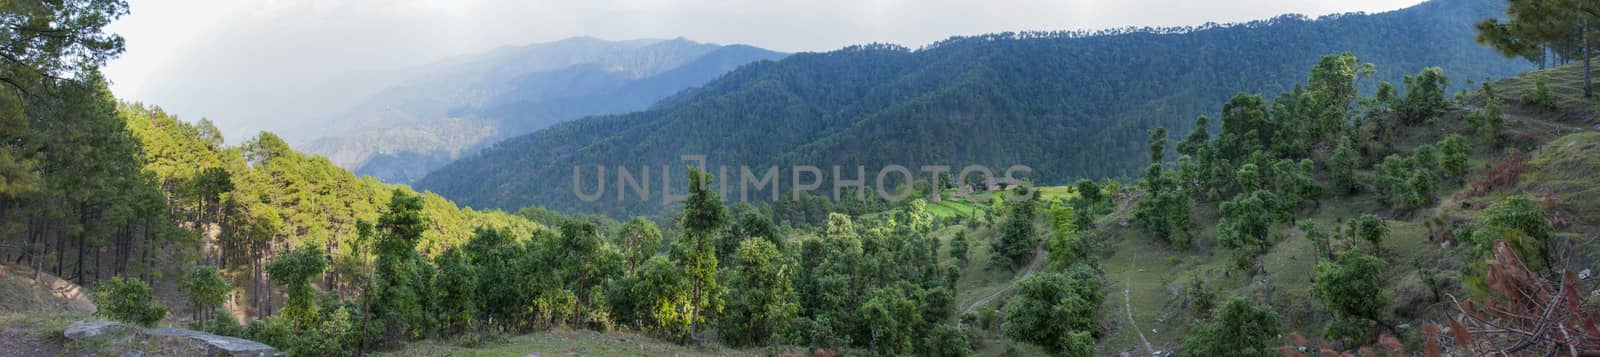 Panoramic in the mountains of Almora in India